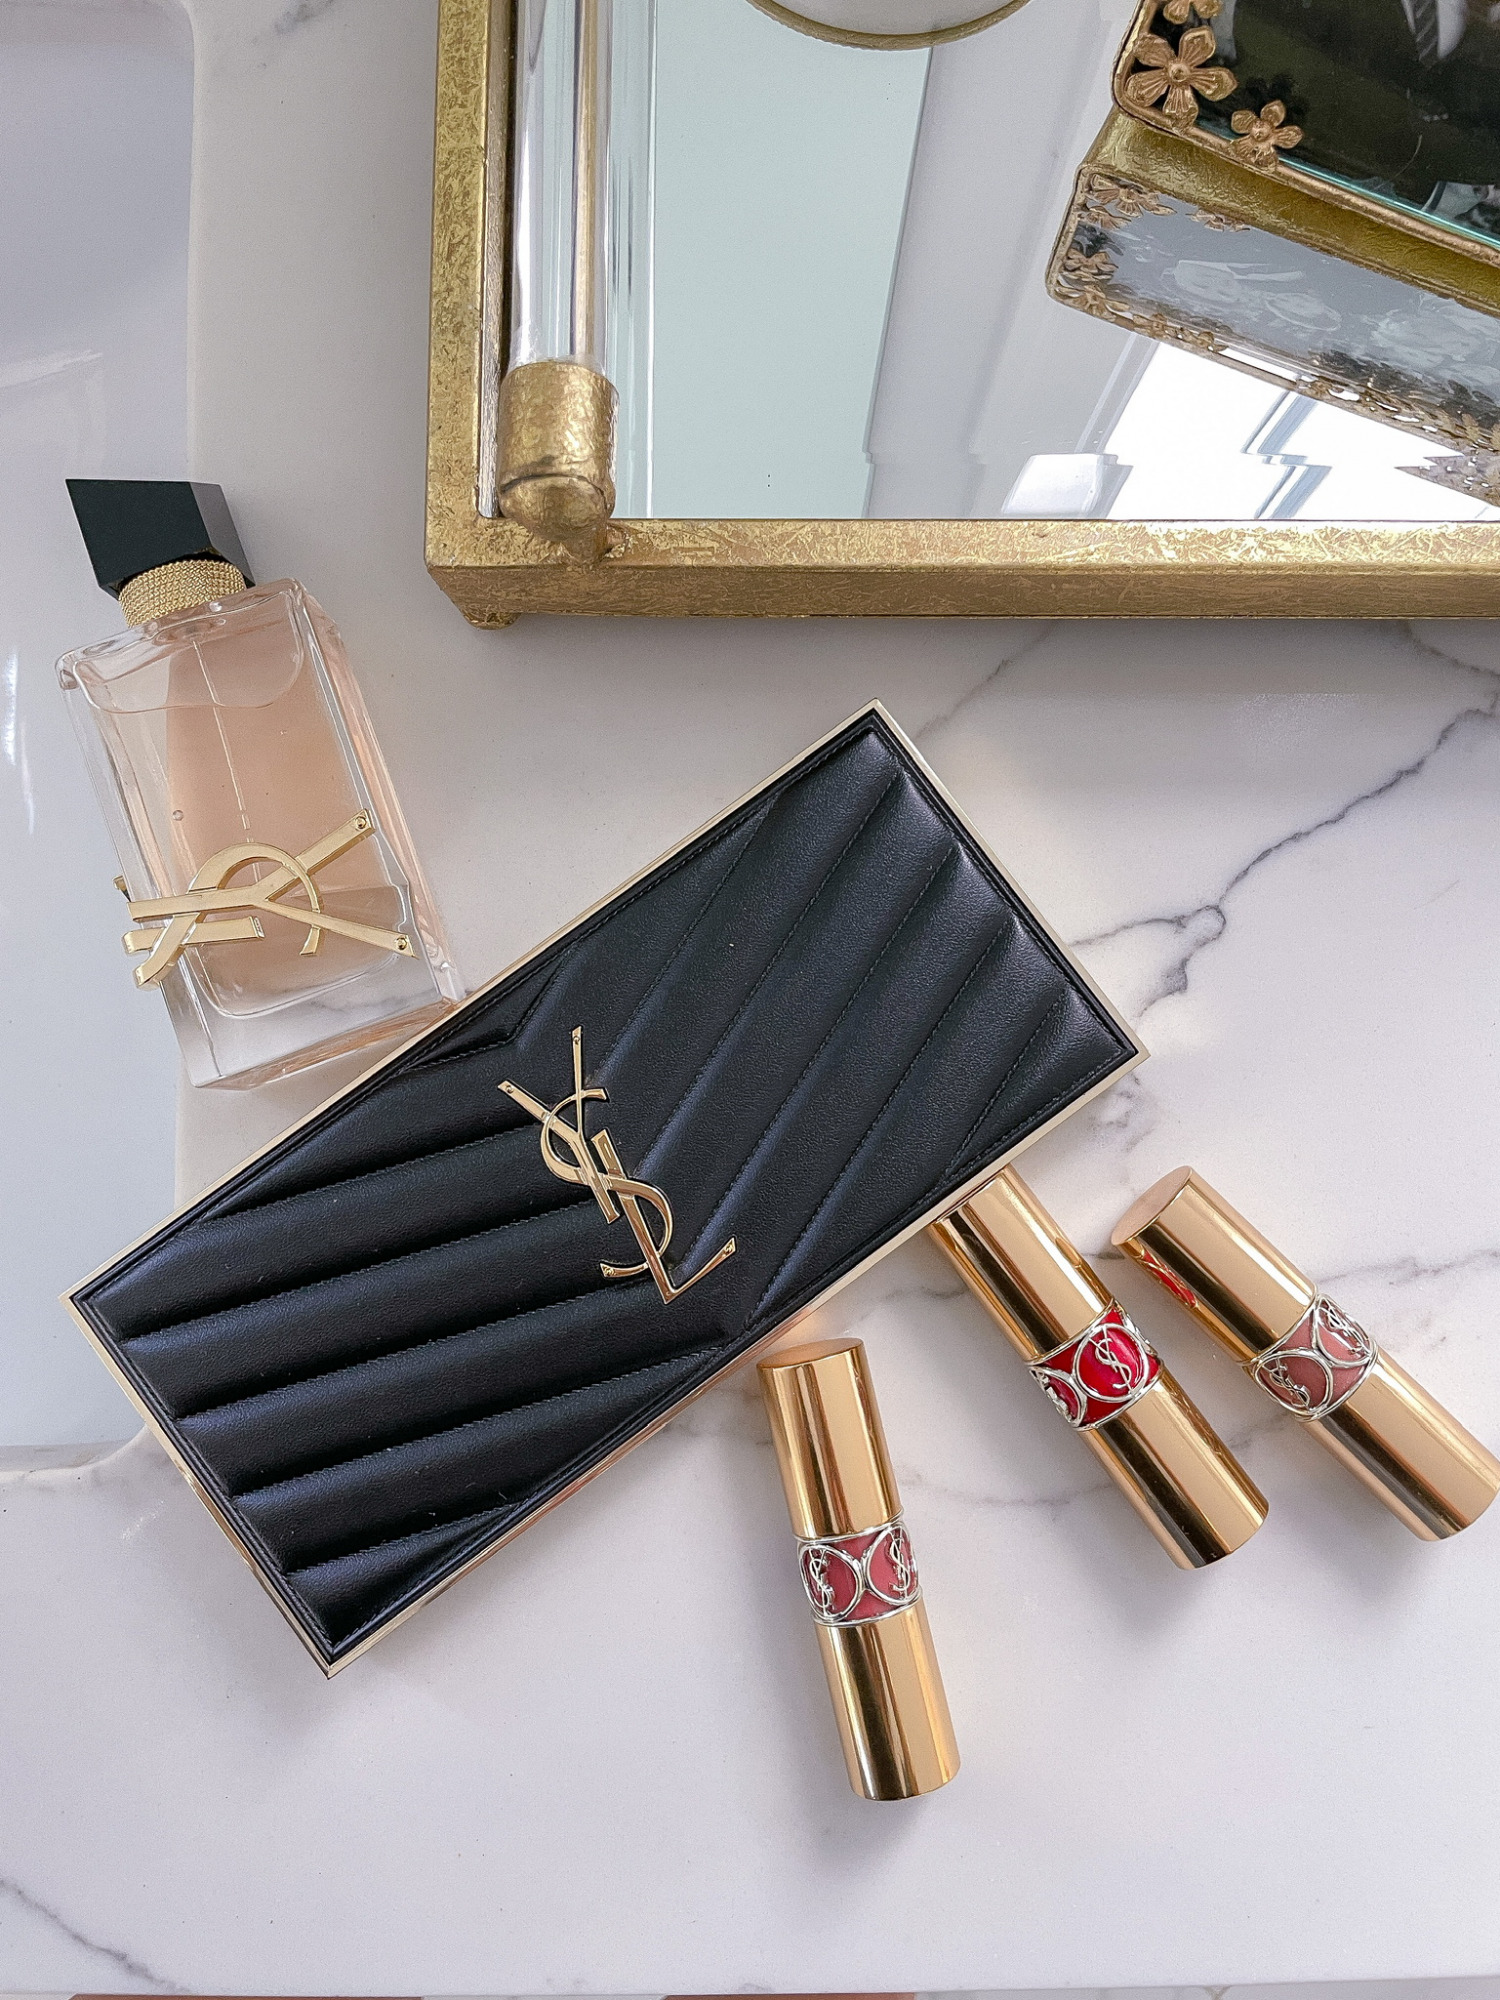 YSL-beaute-review-lipstick-rouge-volupte-shine-summer-lipstick-ltk-day-sale | LTK Sales by popular US fashion blog, The Sweetest Thing: image of a YSL clutch YSL lipstick, and YSL perfume. 